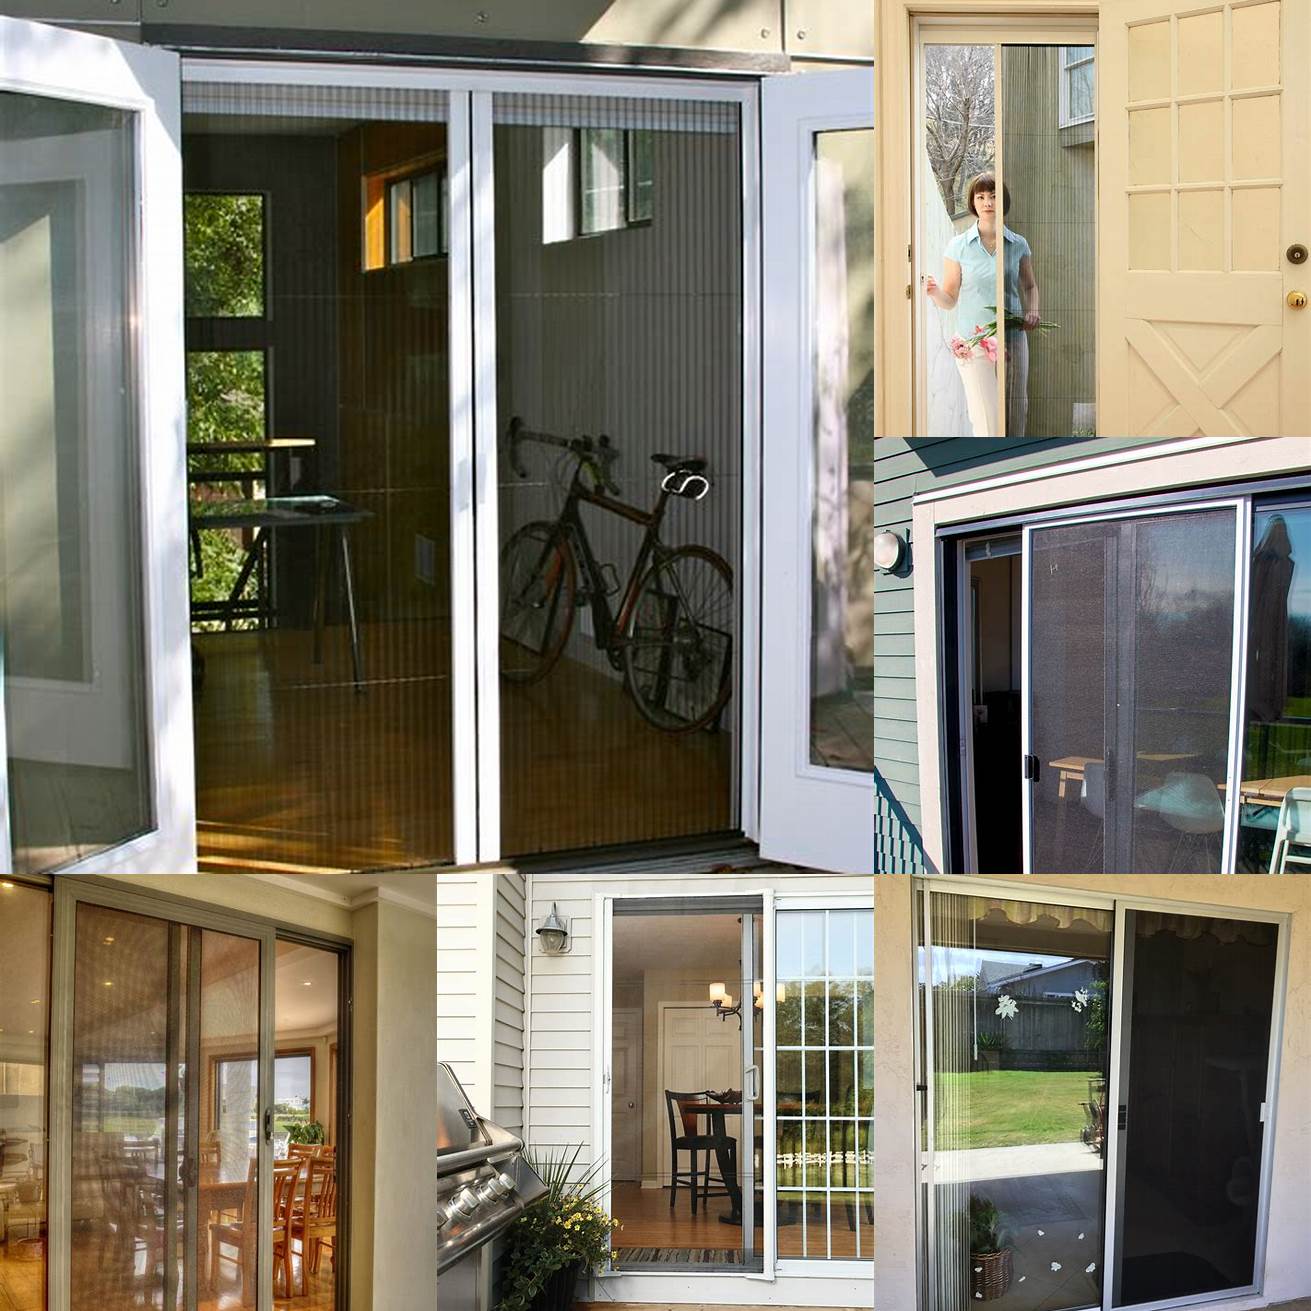 Improved ventilation Sliding screen doors allow for fresh air to circulate throughout the home which can improve indoor air quality and reduce the need for air conditioning